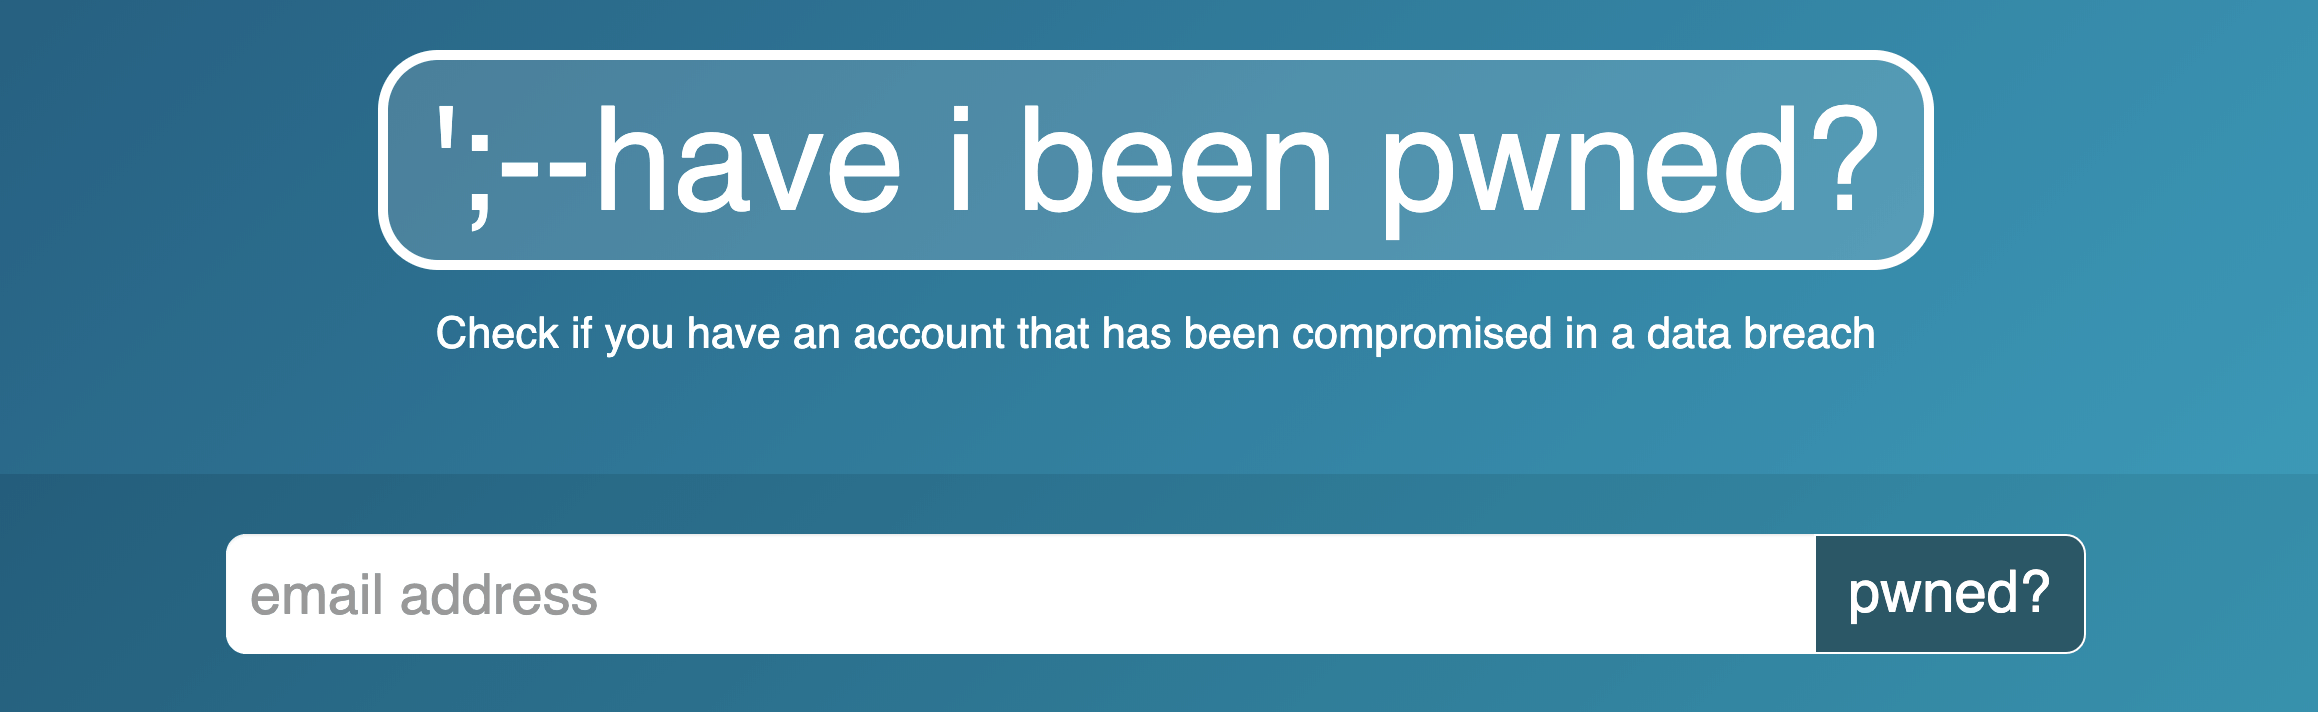  Check if you have an account that has been compromised in a data breach.